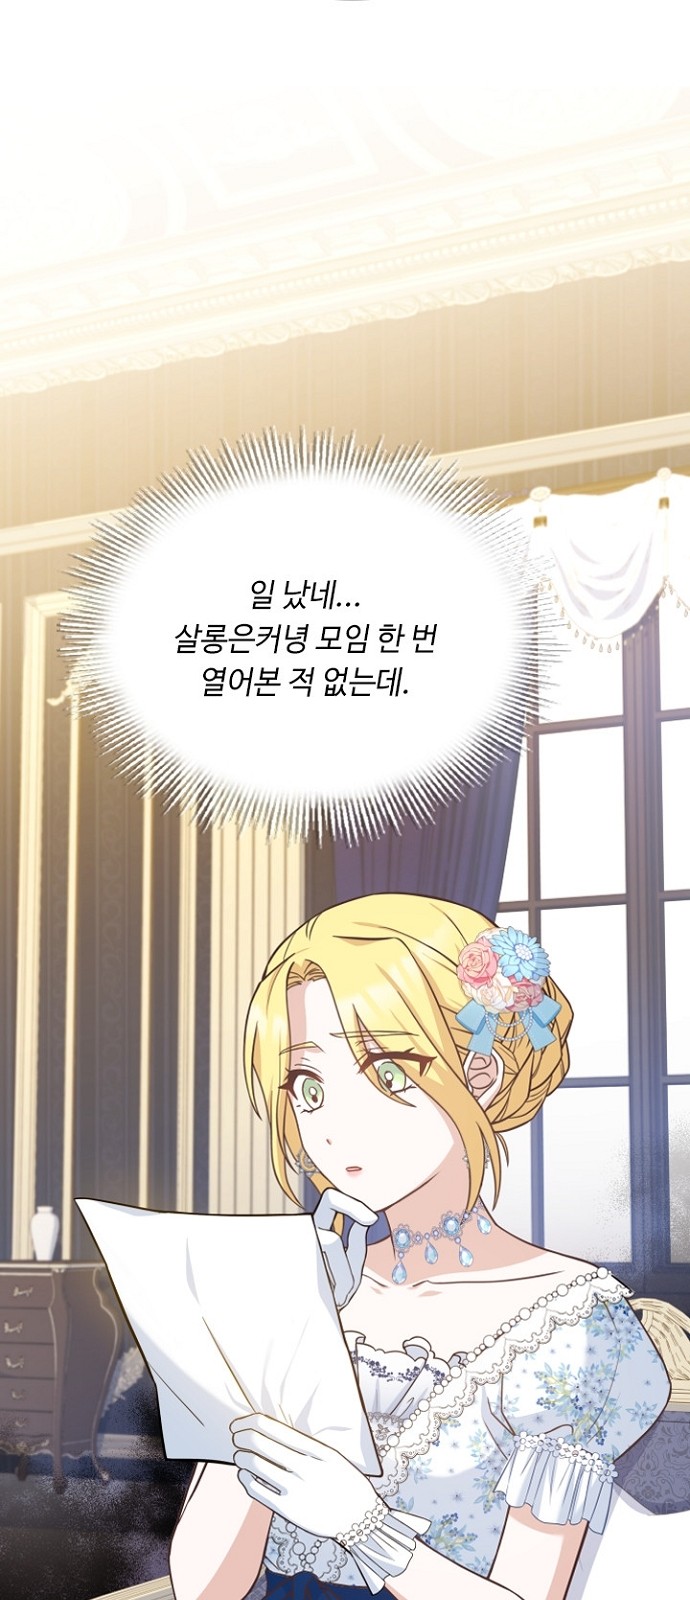 His Majesty's Proposal (A Night With the Emperor) - Chapter 42 - Page 4